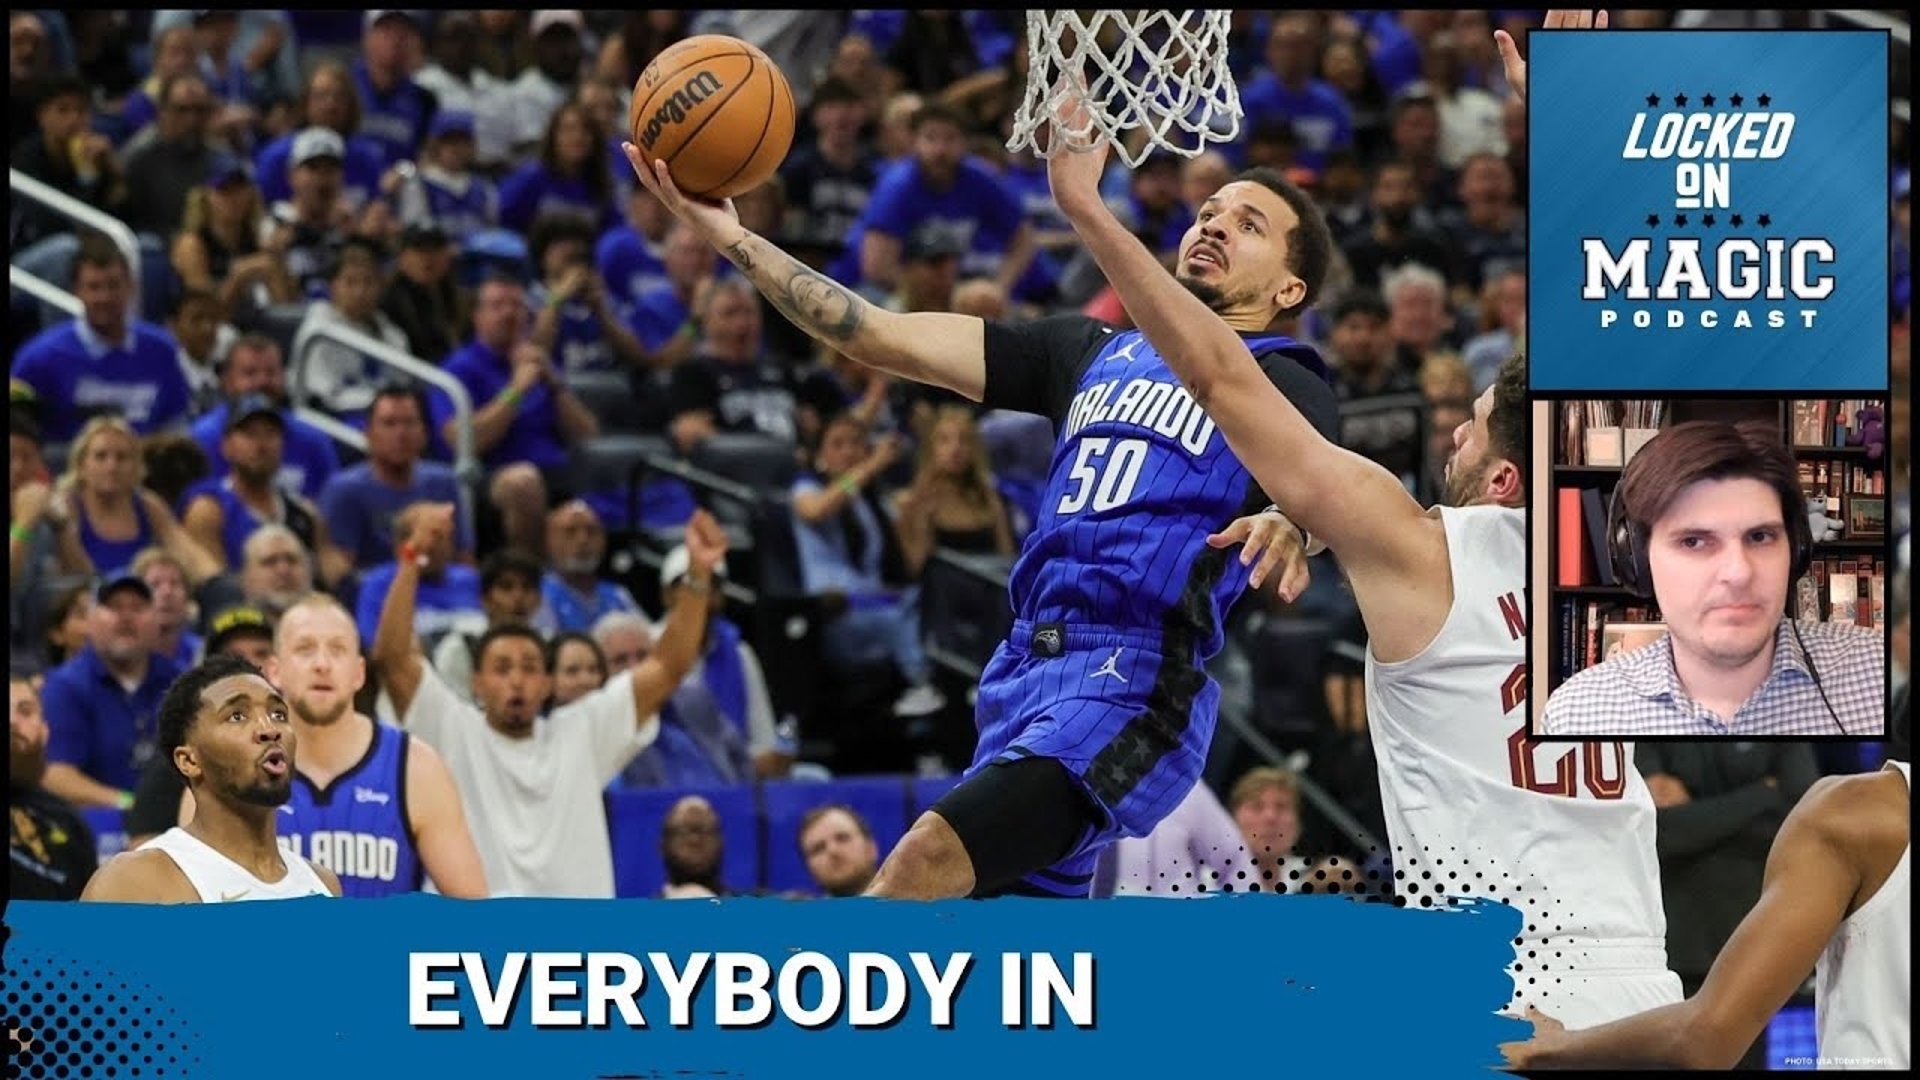 The Orlando Magic's postseason motto is "Everybody In." The team lived up to that moniker.